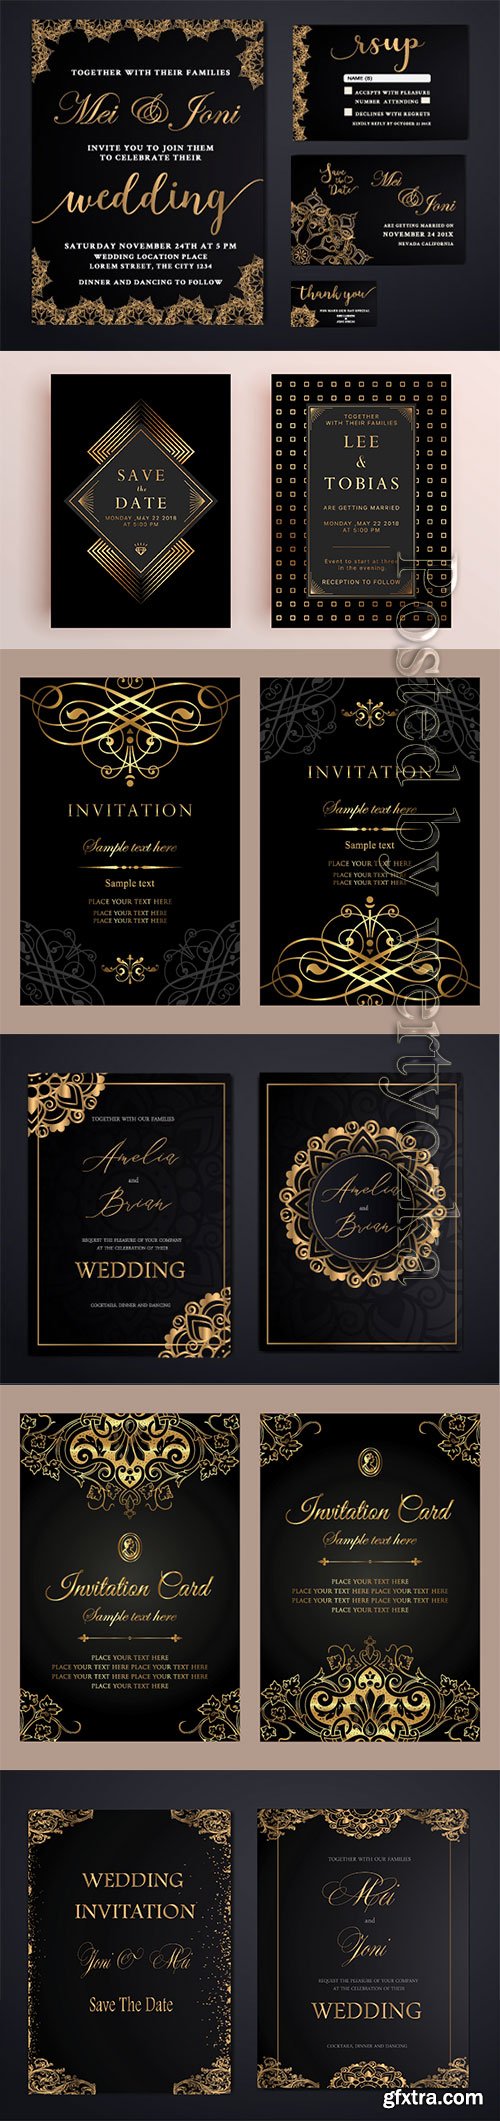 Invitation card luxury gold template design in vintage style